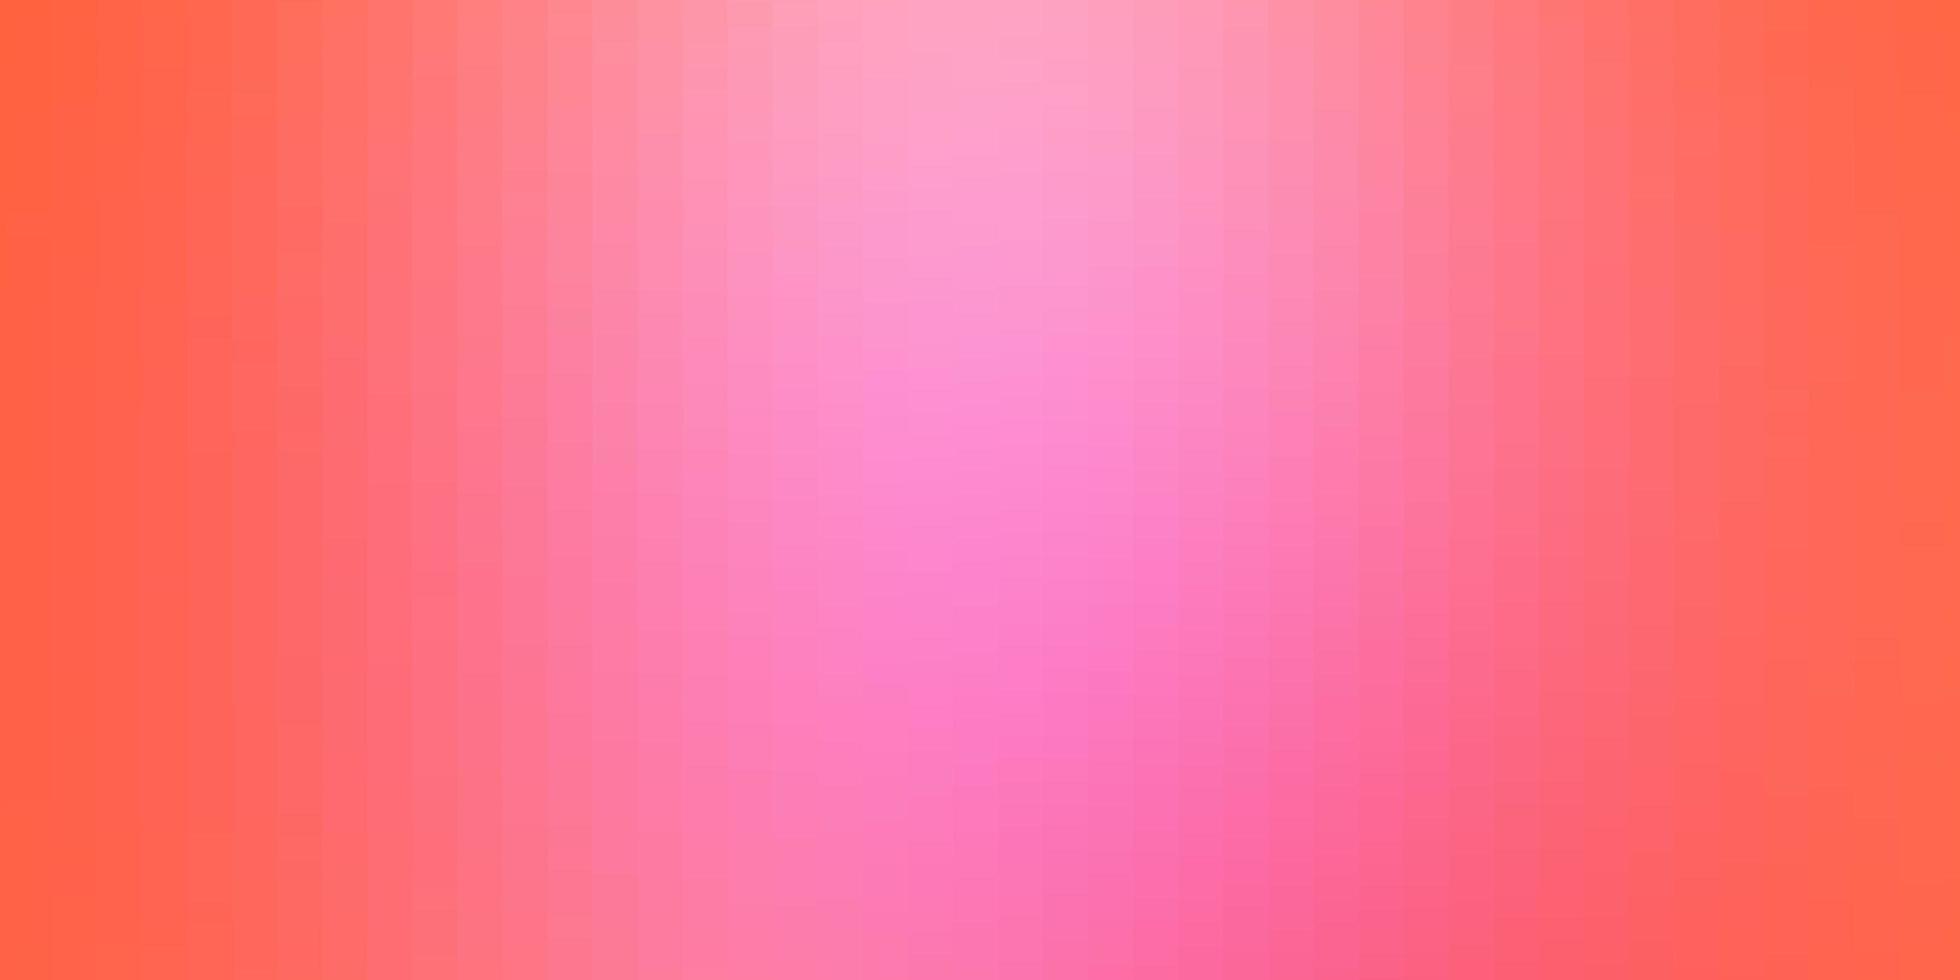 Light Pink vector template with rectangles.